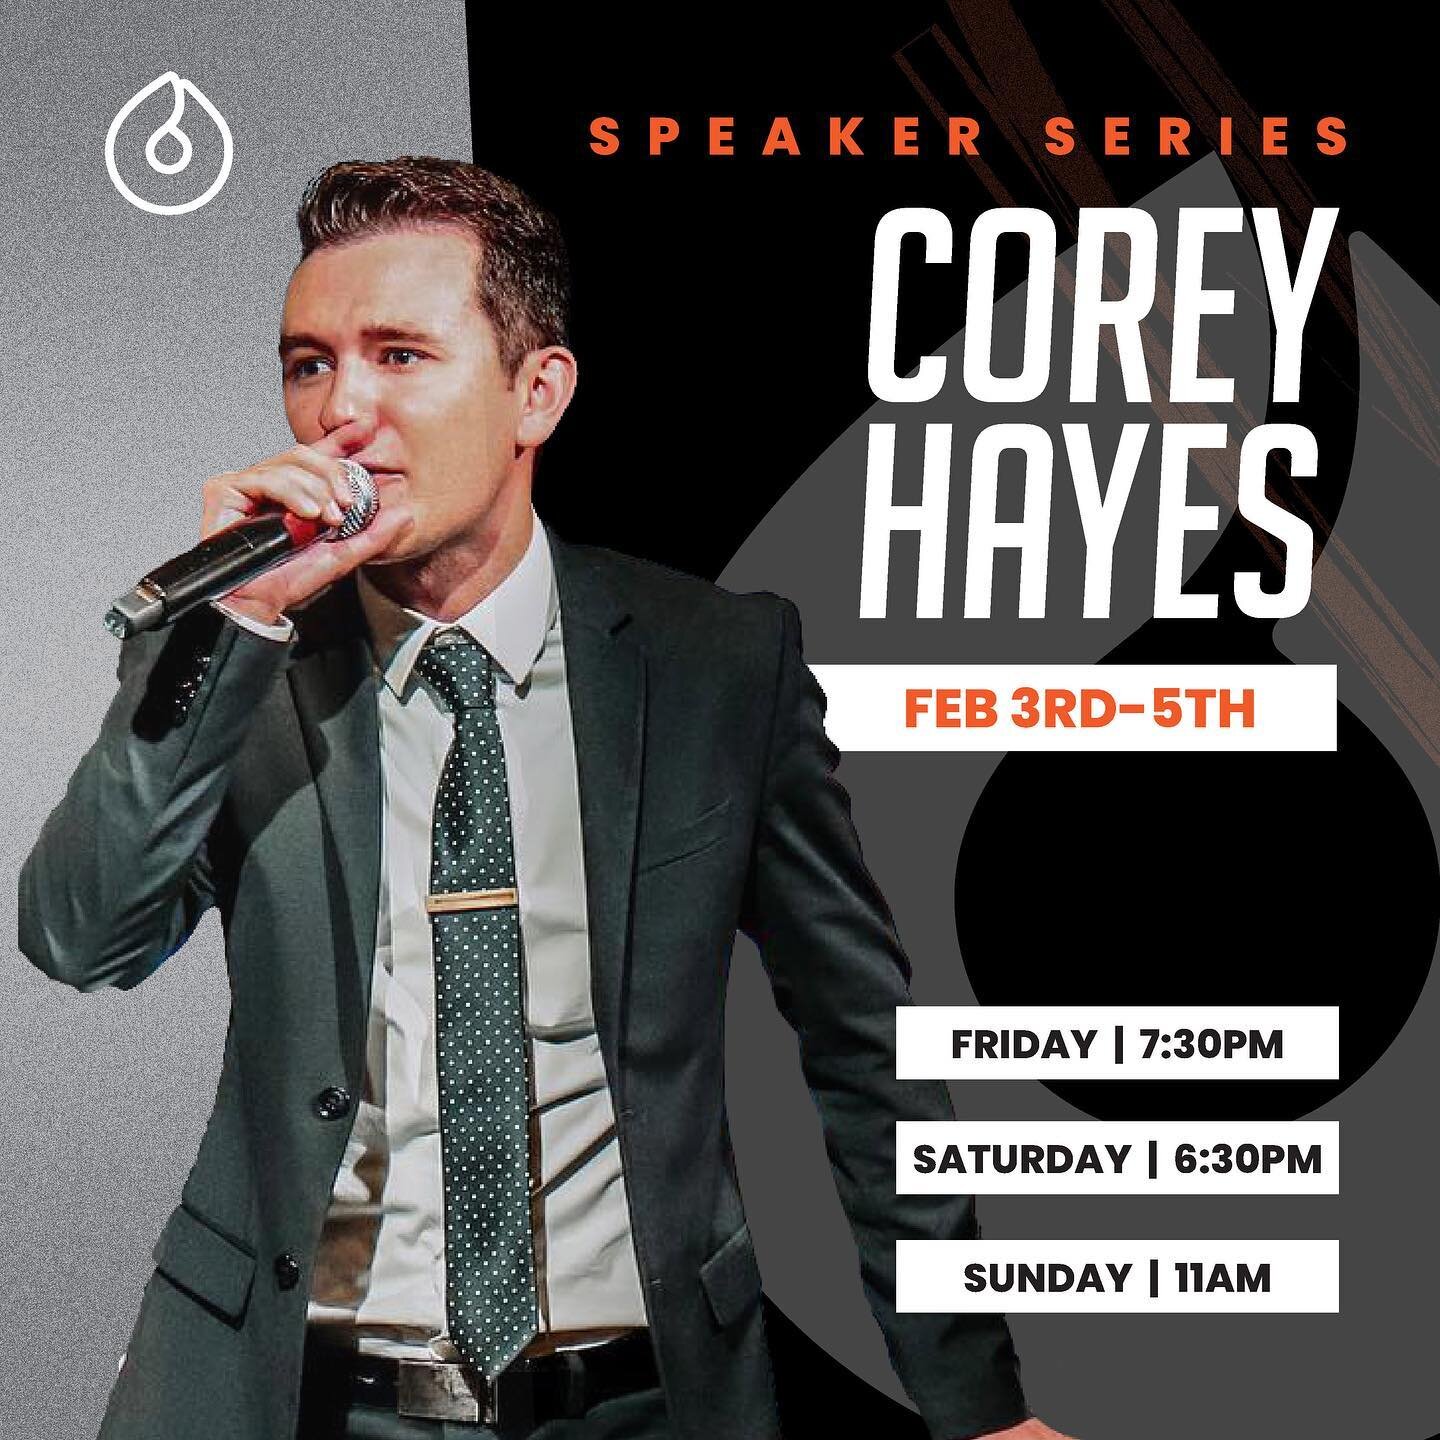 🔔 Set a reminder and join us this Friday!

We&rsquo;re excited to have Corey and Crystal Hayes with us this weekend at Landmark.